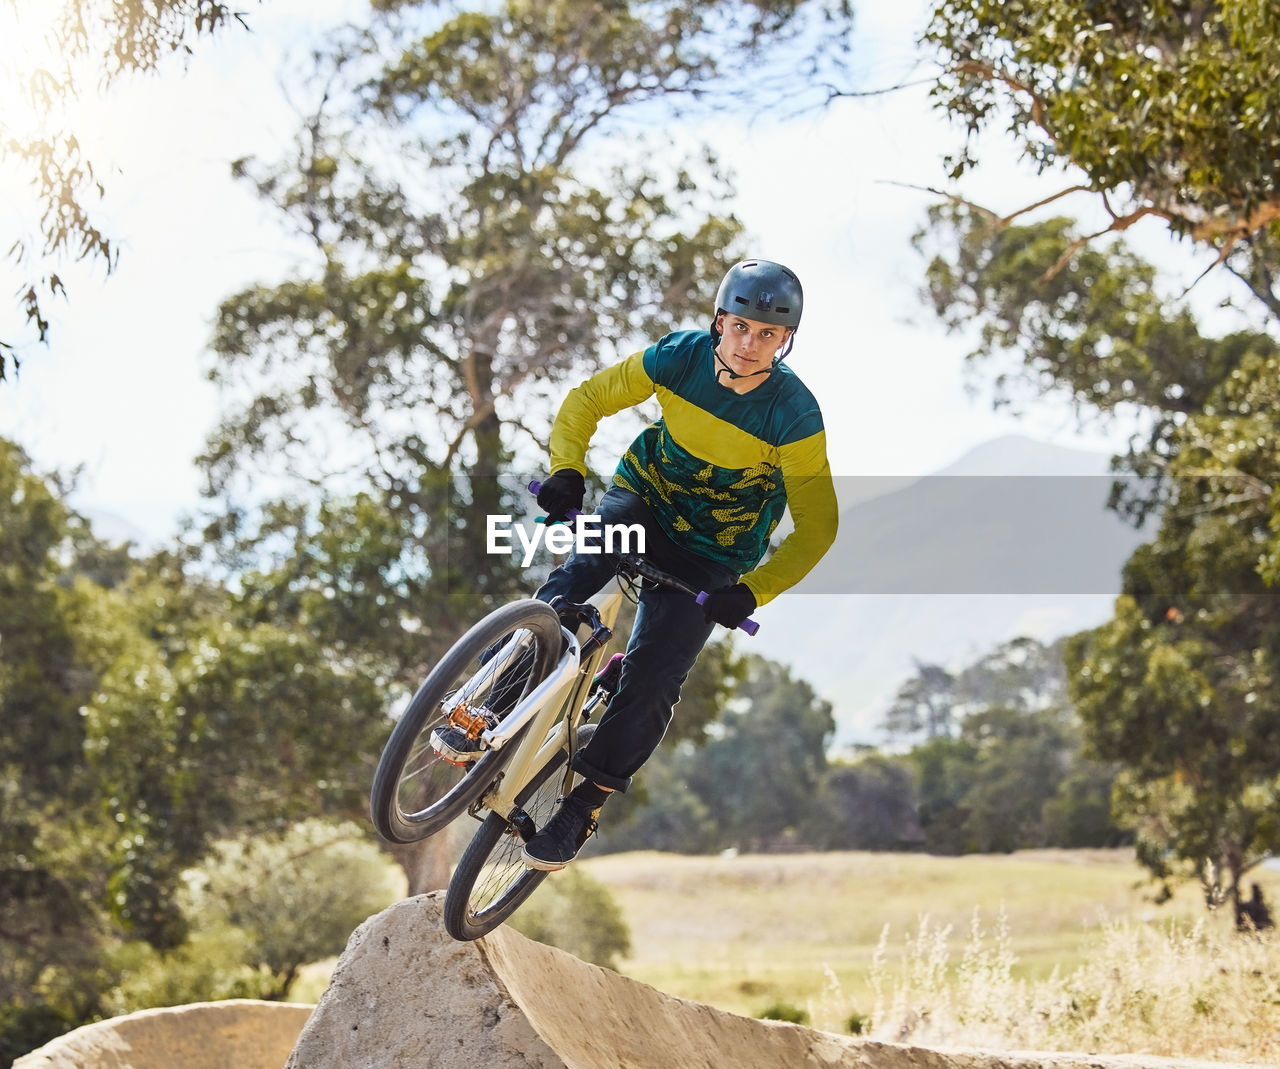 sports, cycle sport, bicycle, one person, mountain biking, helmet, skill, headwear, leisure activity, full length, motion, mountain bike, adult, downhill mountain biking, activity, men, extreme sports, nature, tree, bicycle motocross, lifestyles, day, vehicle, sports helmet, sports clothing, sports equipment, vitality, plant, adventure, clothing, exercising, young adult, stunt, transportation, land vehicle, outdoors, concentration, cycling, protection, risk, bmx bike, jumping, mid-air, agility, riding, challenge, sunlight, balance, determination, low angle view, cycling helmet, bmx cycling, speed, recreation, competition, front view, exhilaration, on the move, sky, joy, land, person